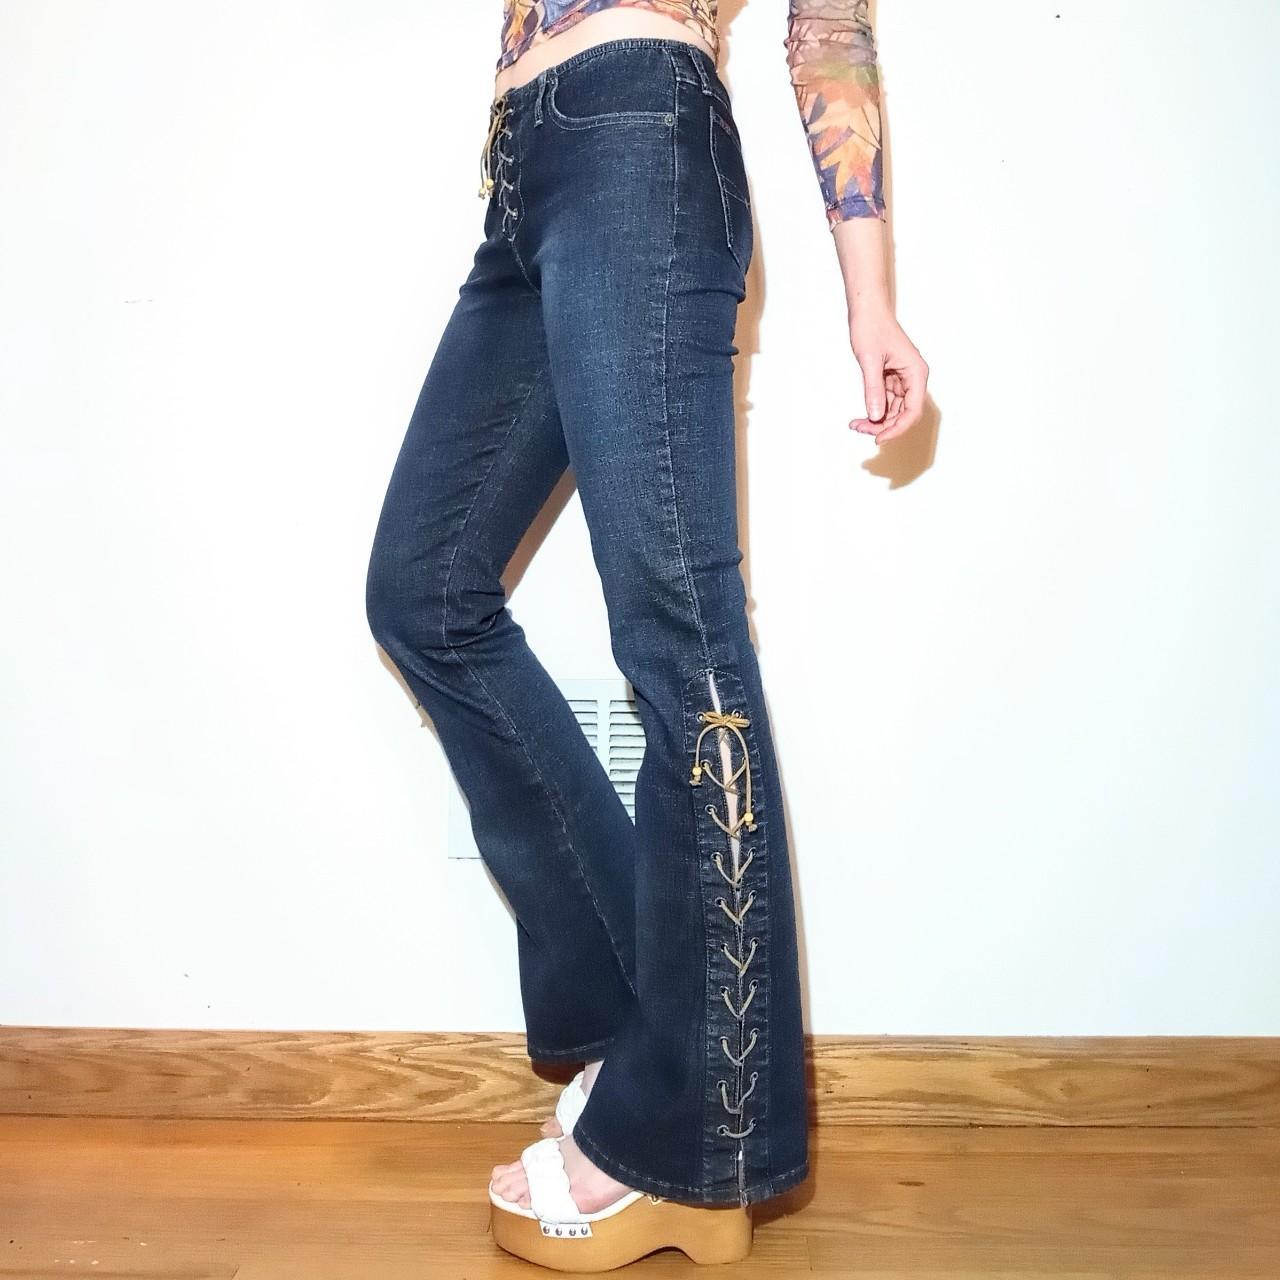 Y2K Lace Up Mudd Jeans low rise flare jeans with... - Depop